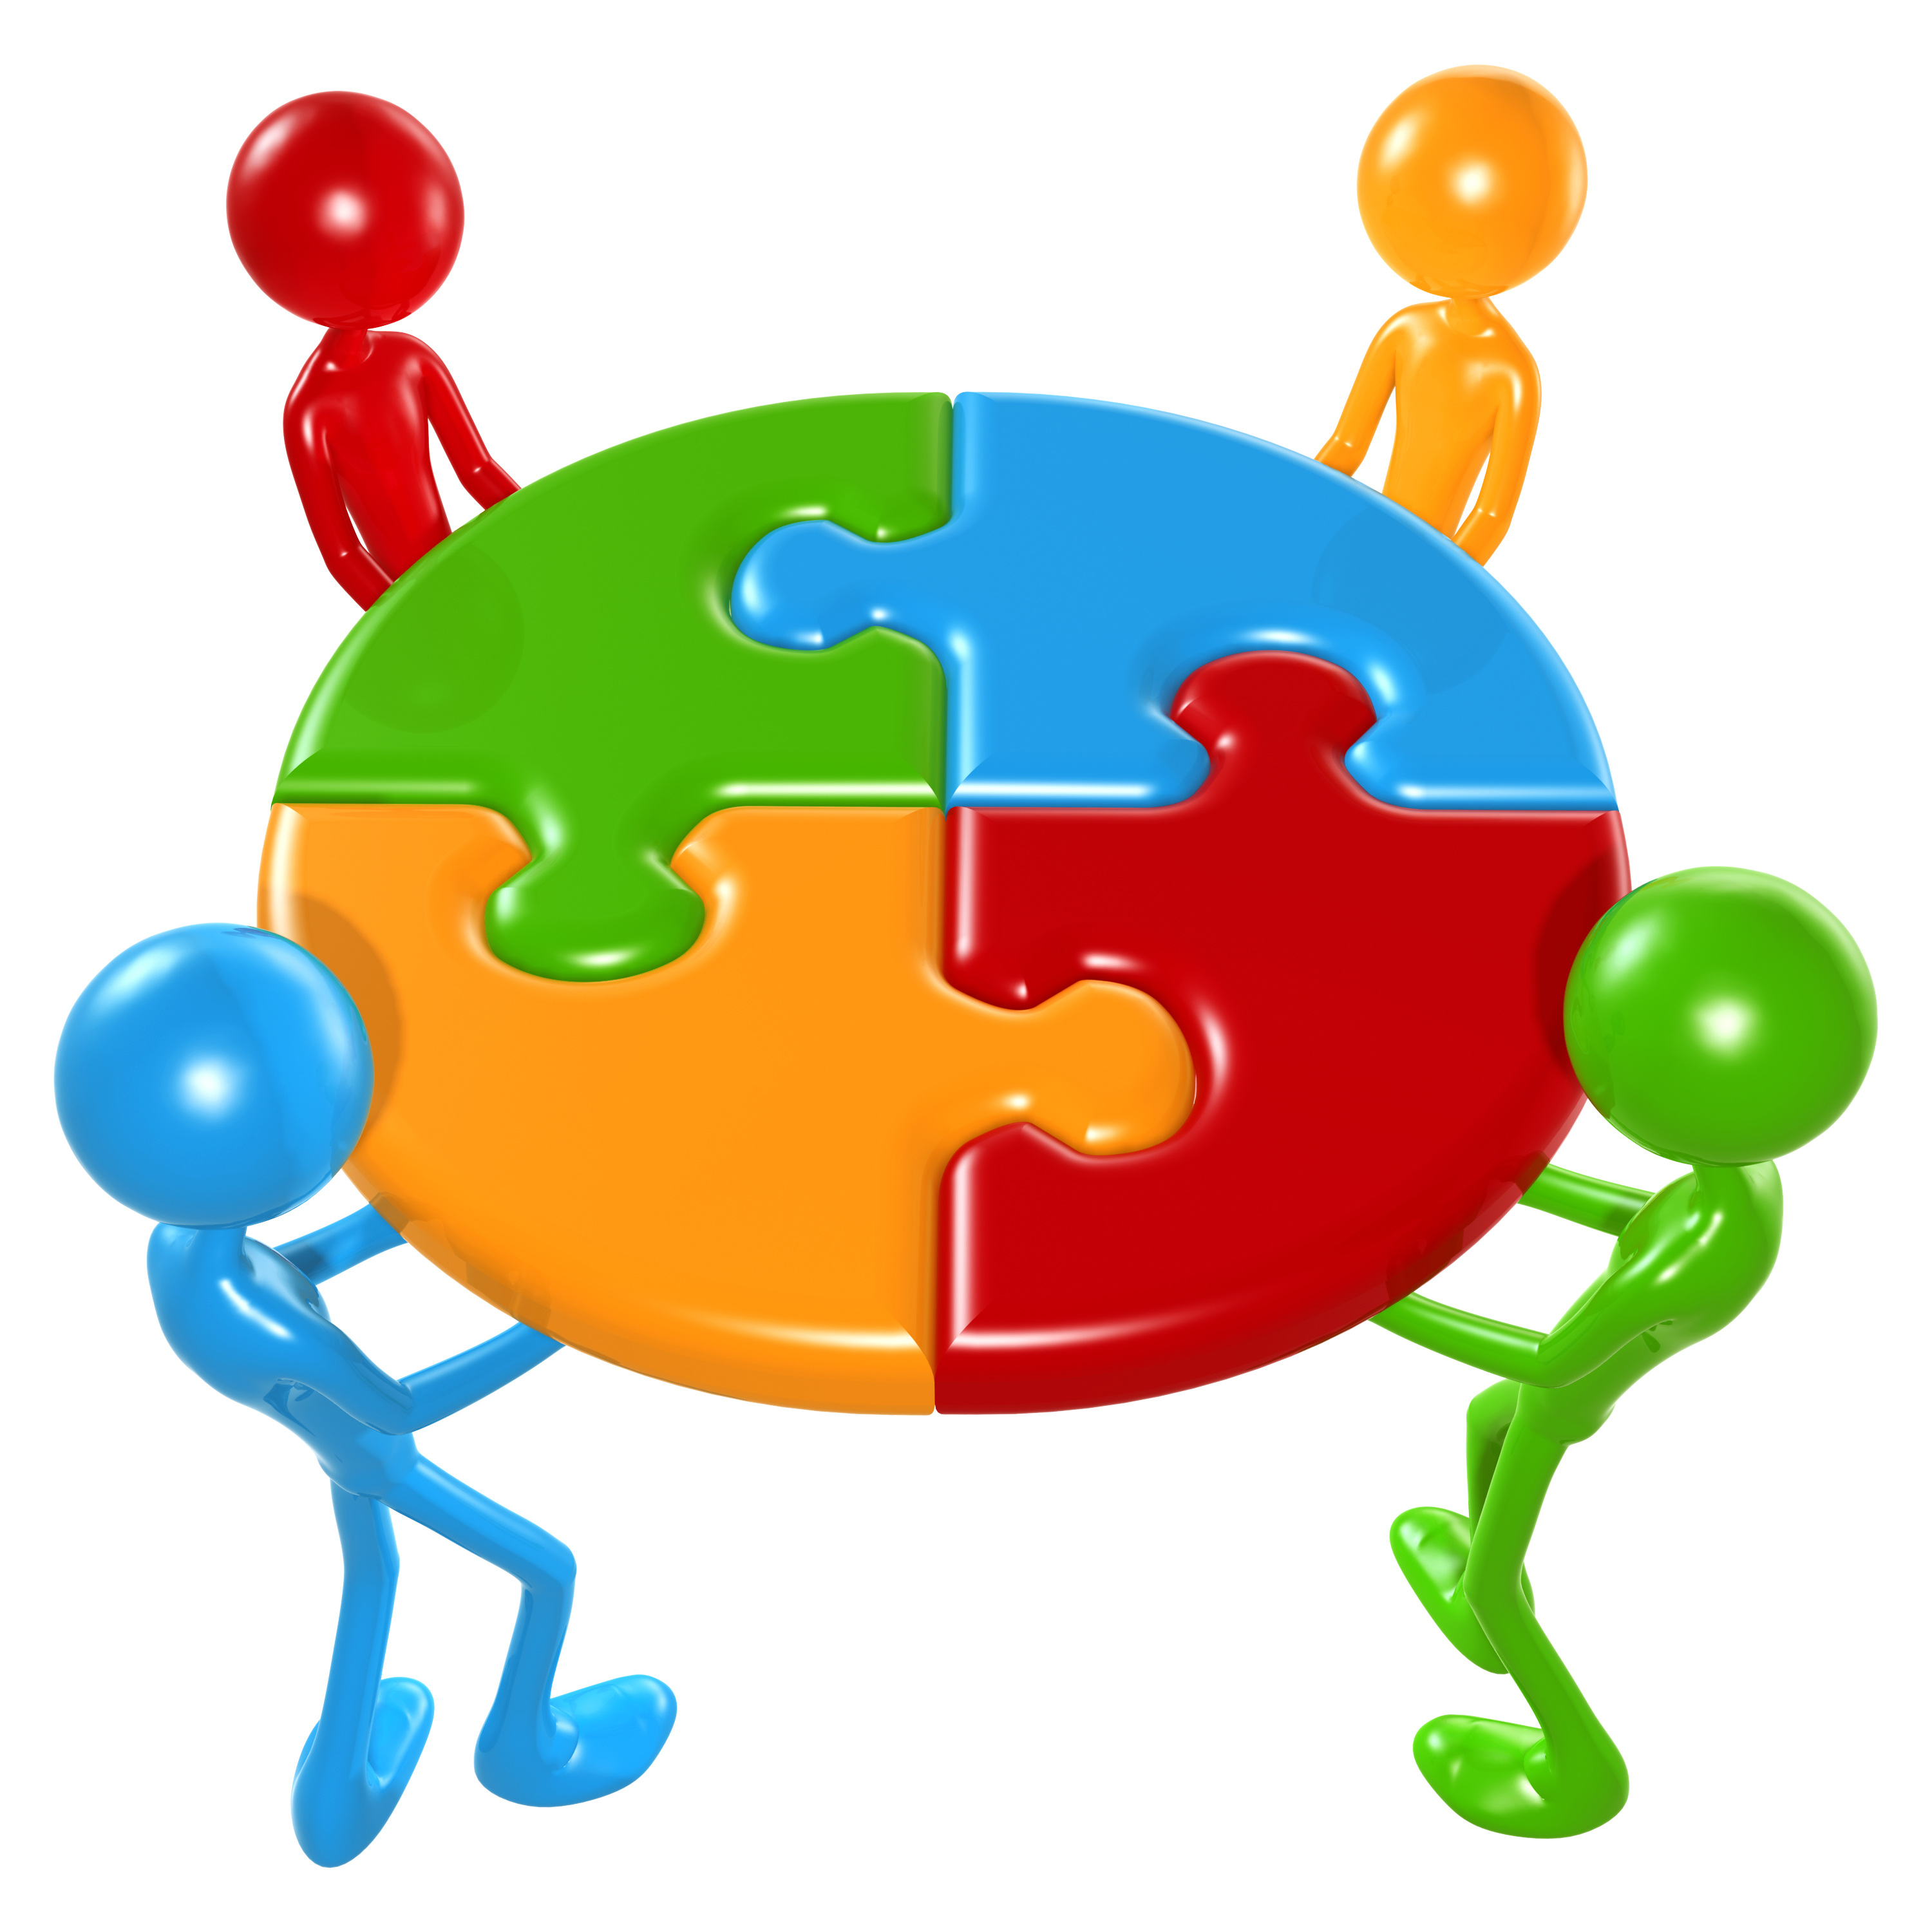 Free Image Of Team Work, Download Free Clip Art, Free Clip